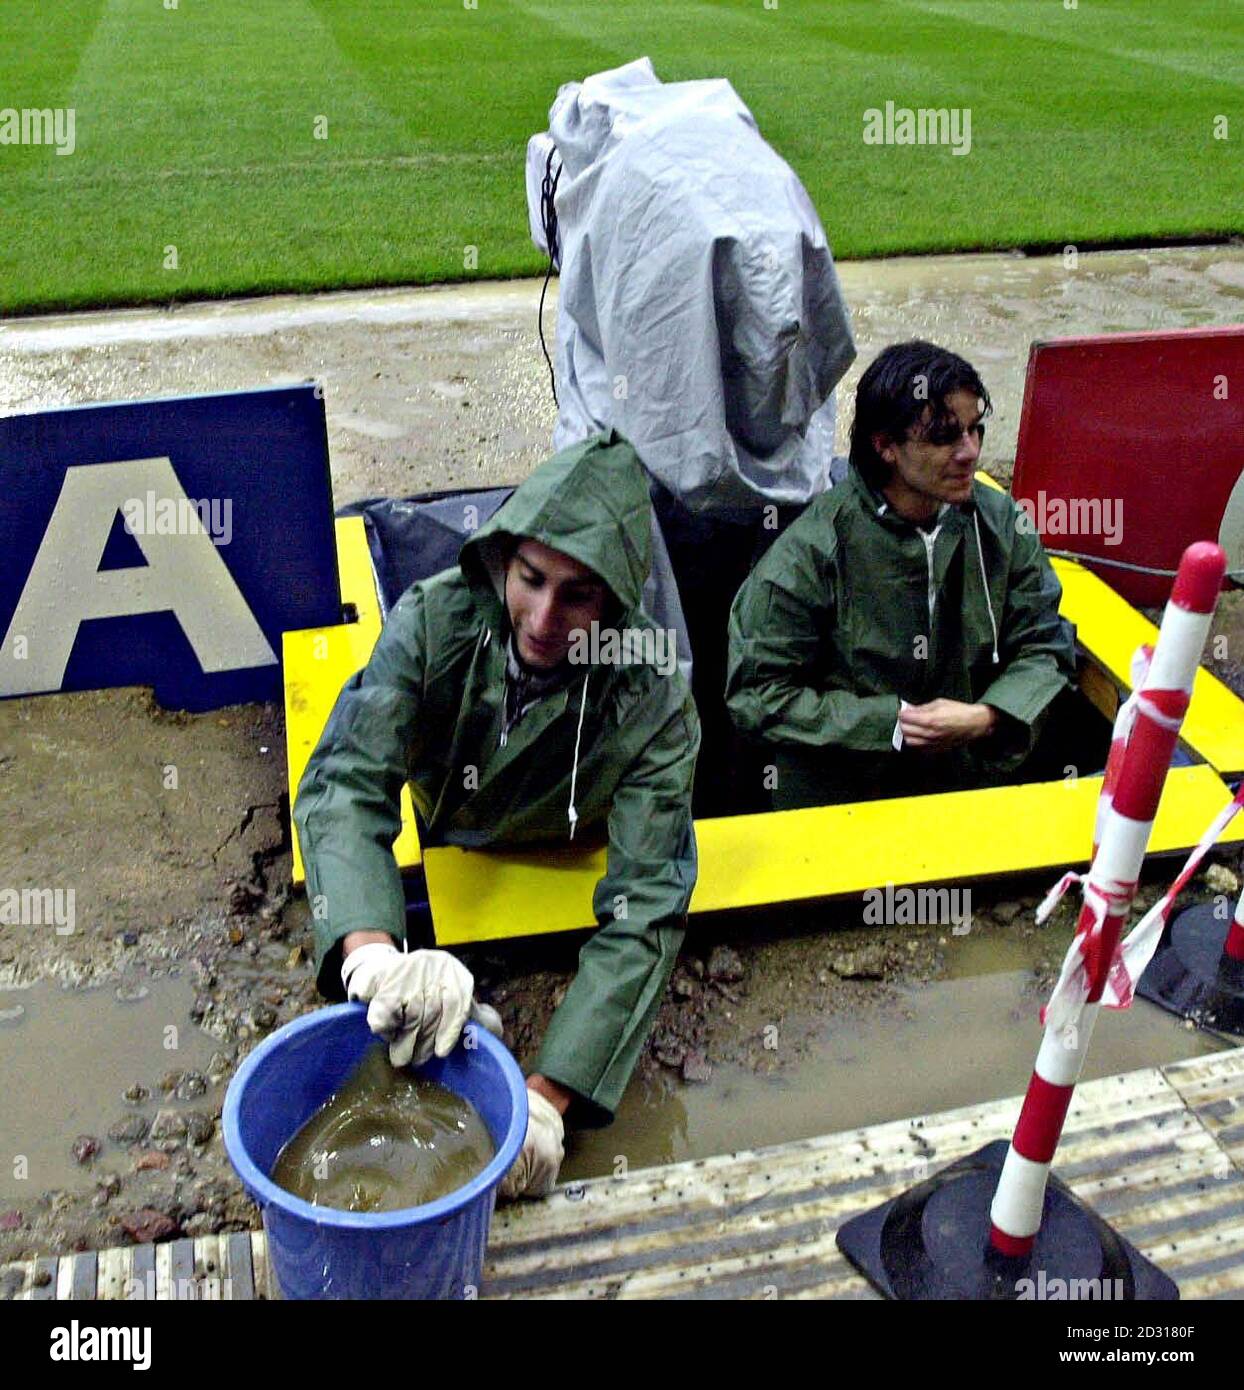 A television crew use a bucket to empty their camera pit of rain water as they prepare to cover the World Cup qualifier football match between England and Germany at London's Wembley Stadium. Stock Photo